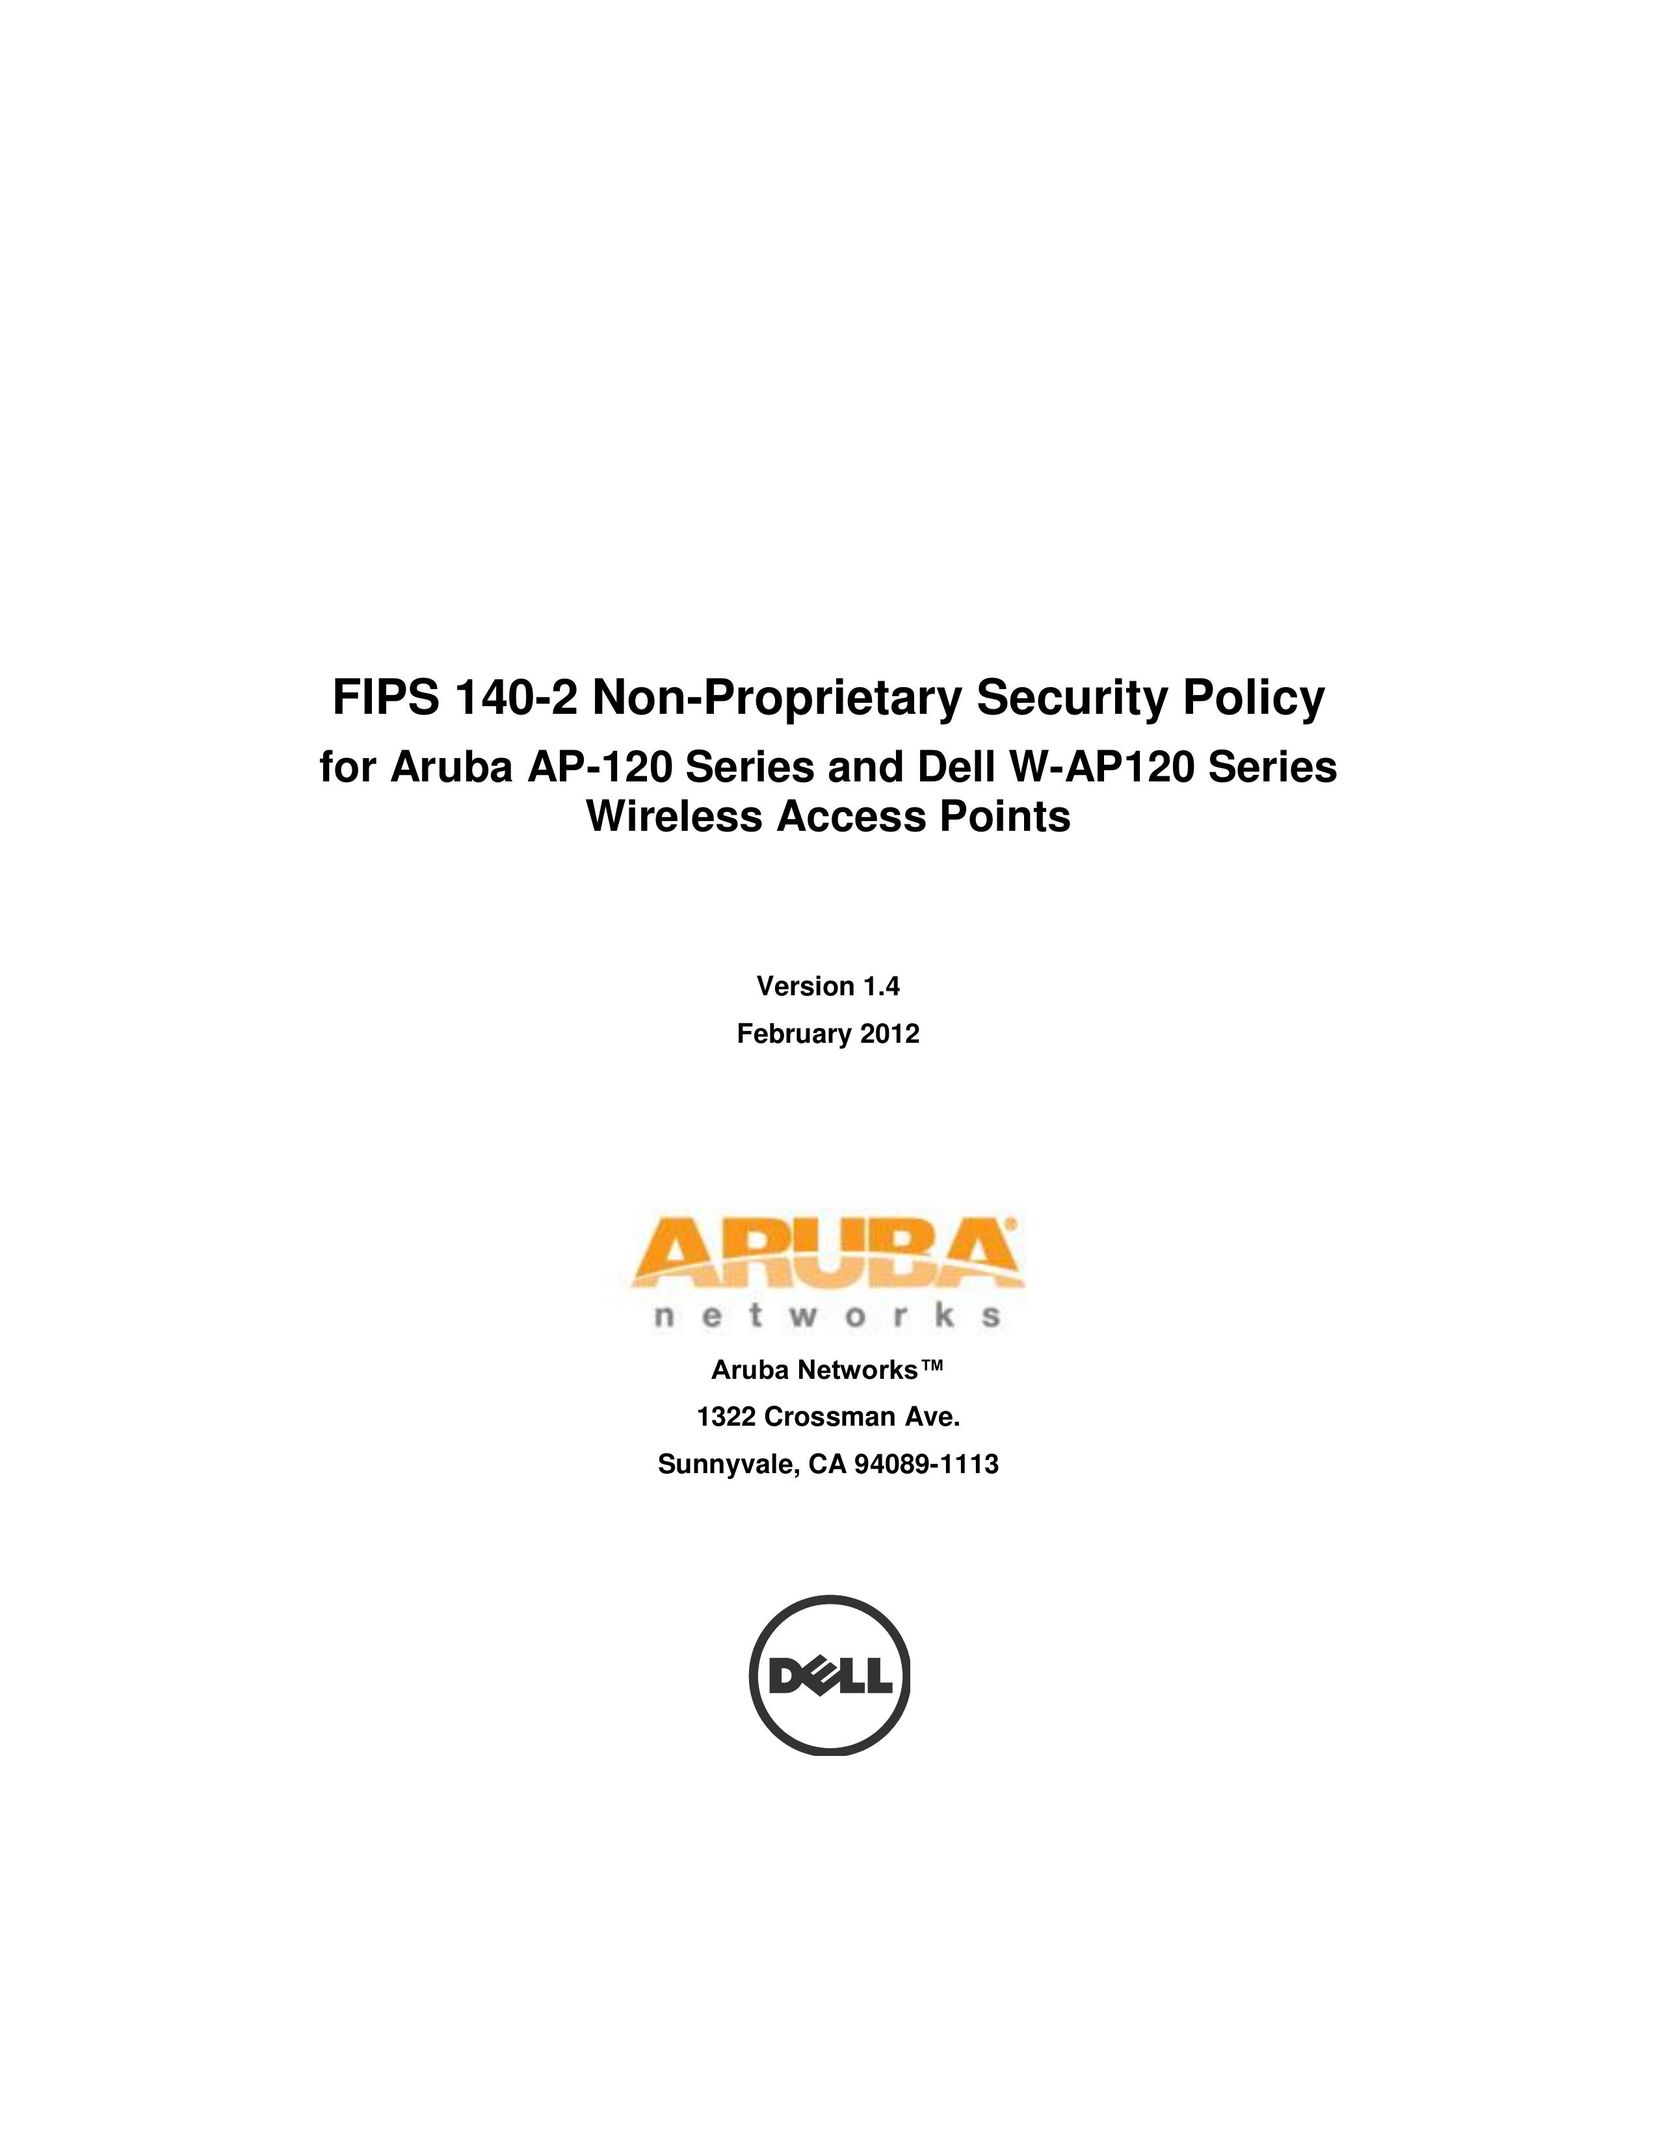 Aruba Networks FIPS 140-2 Network Router User Manual